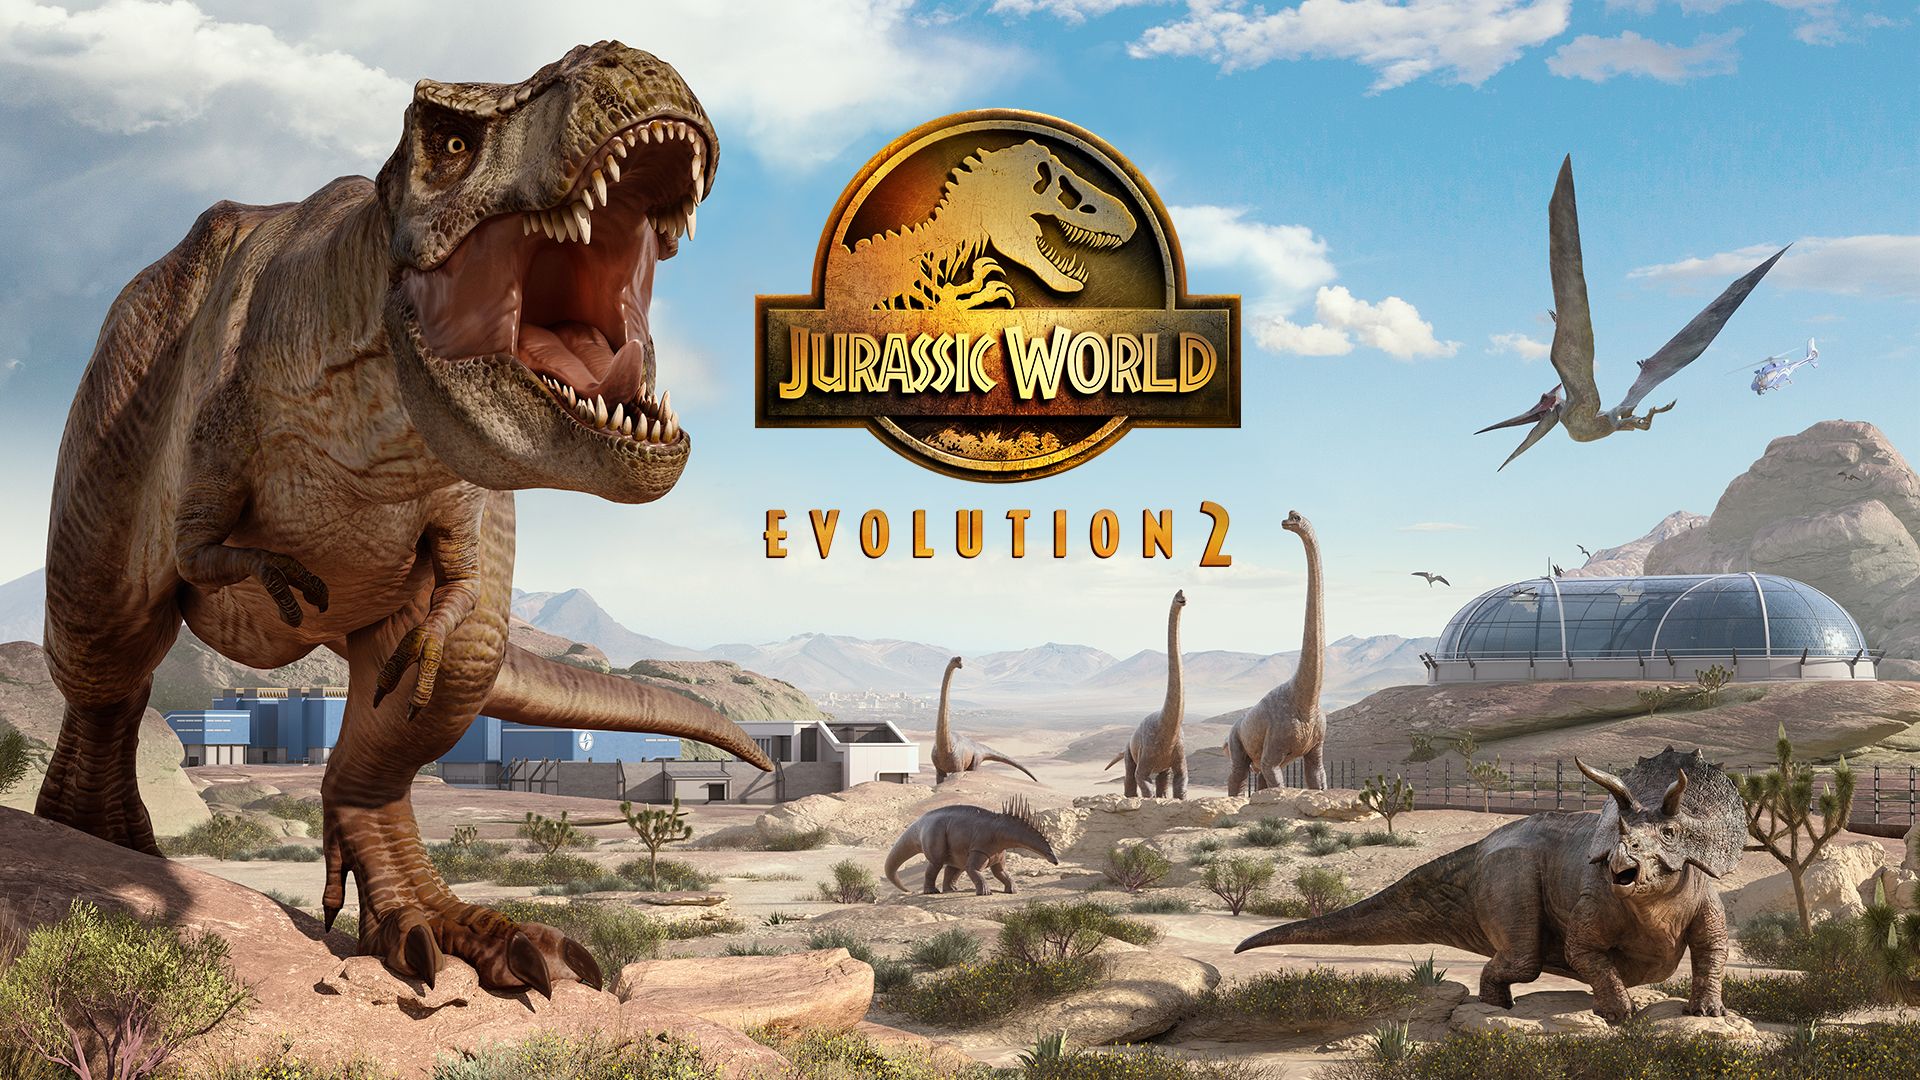 Jurassic World Evolution 2 Shortcuts And Controls For PC